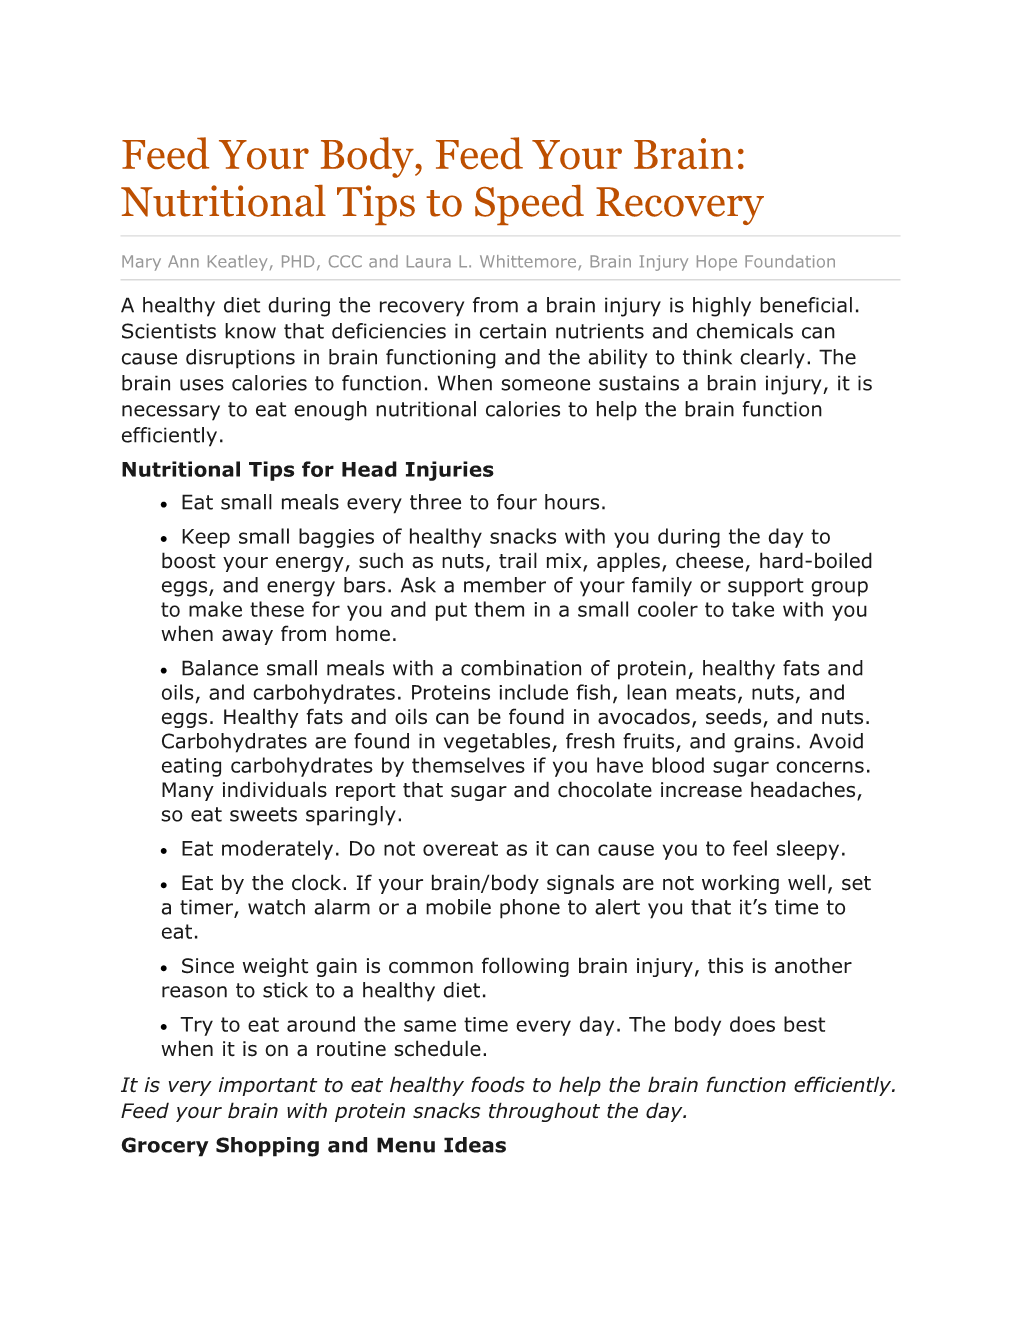 Feed Your Body, Feed Your Brain: Nutritional Tips to Speed Recovery